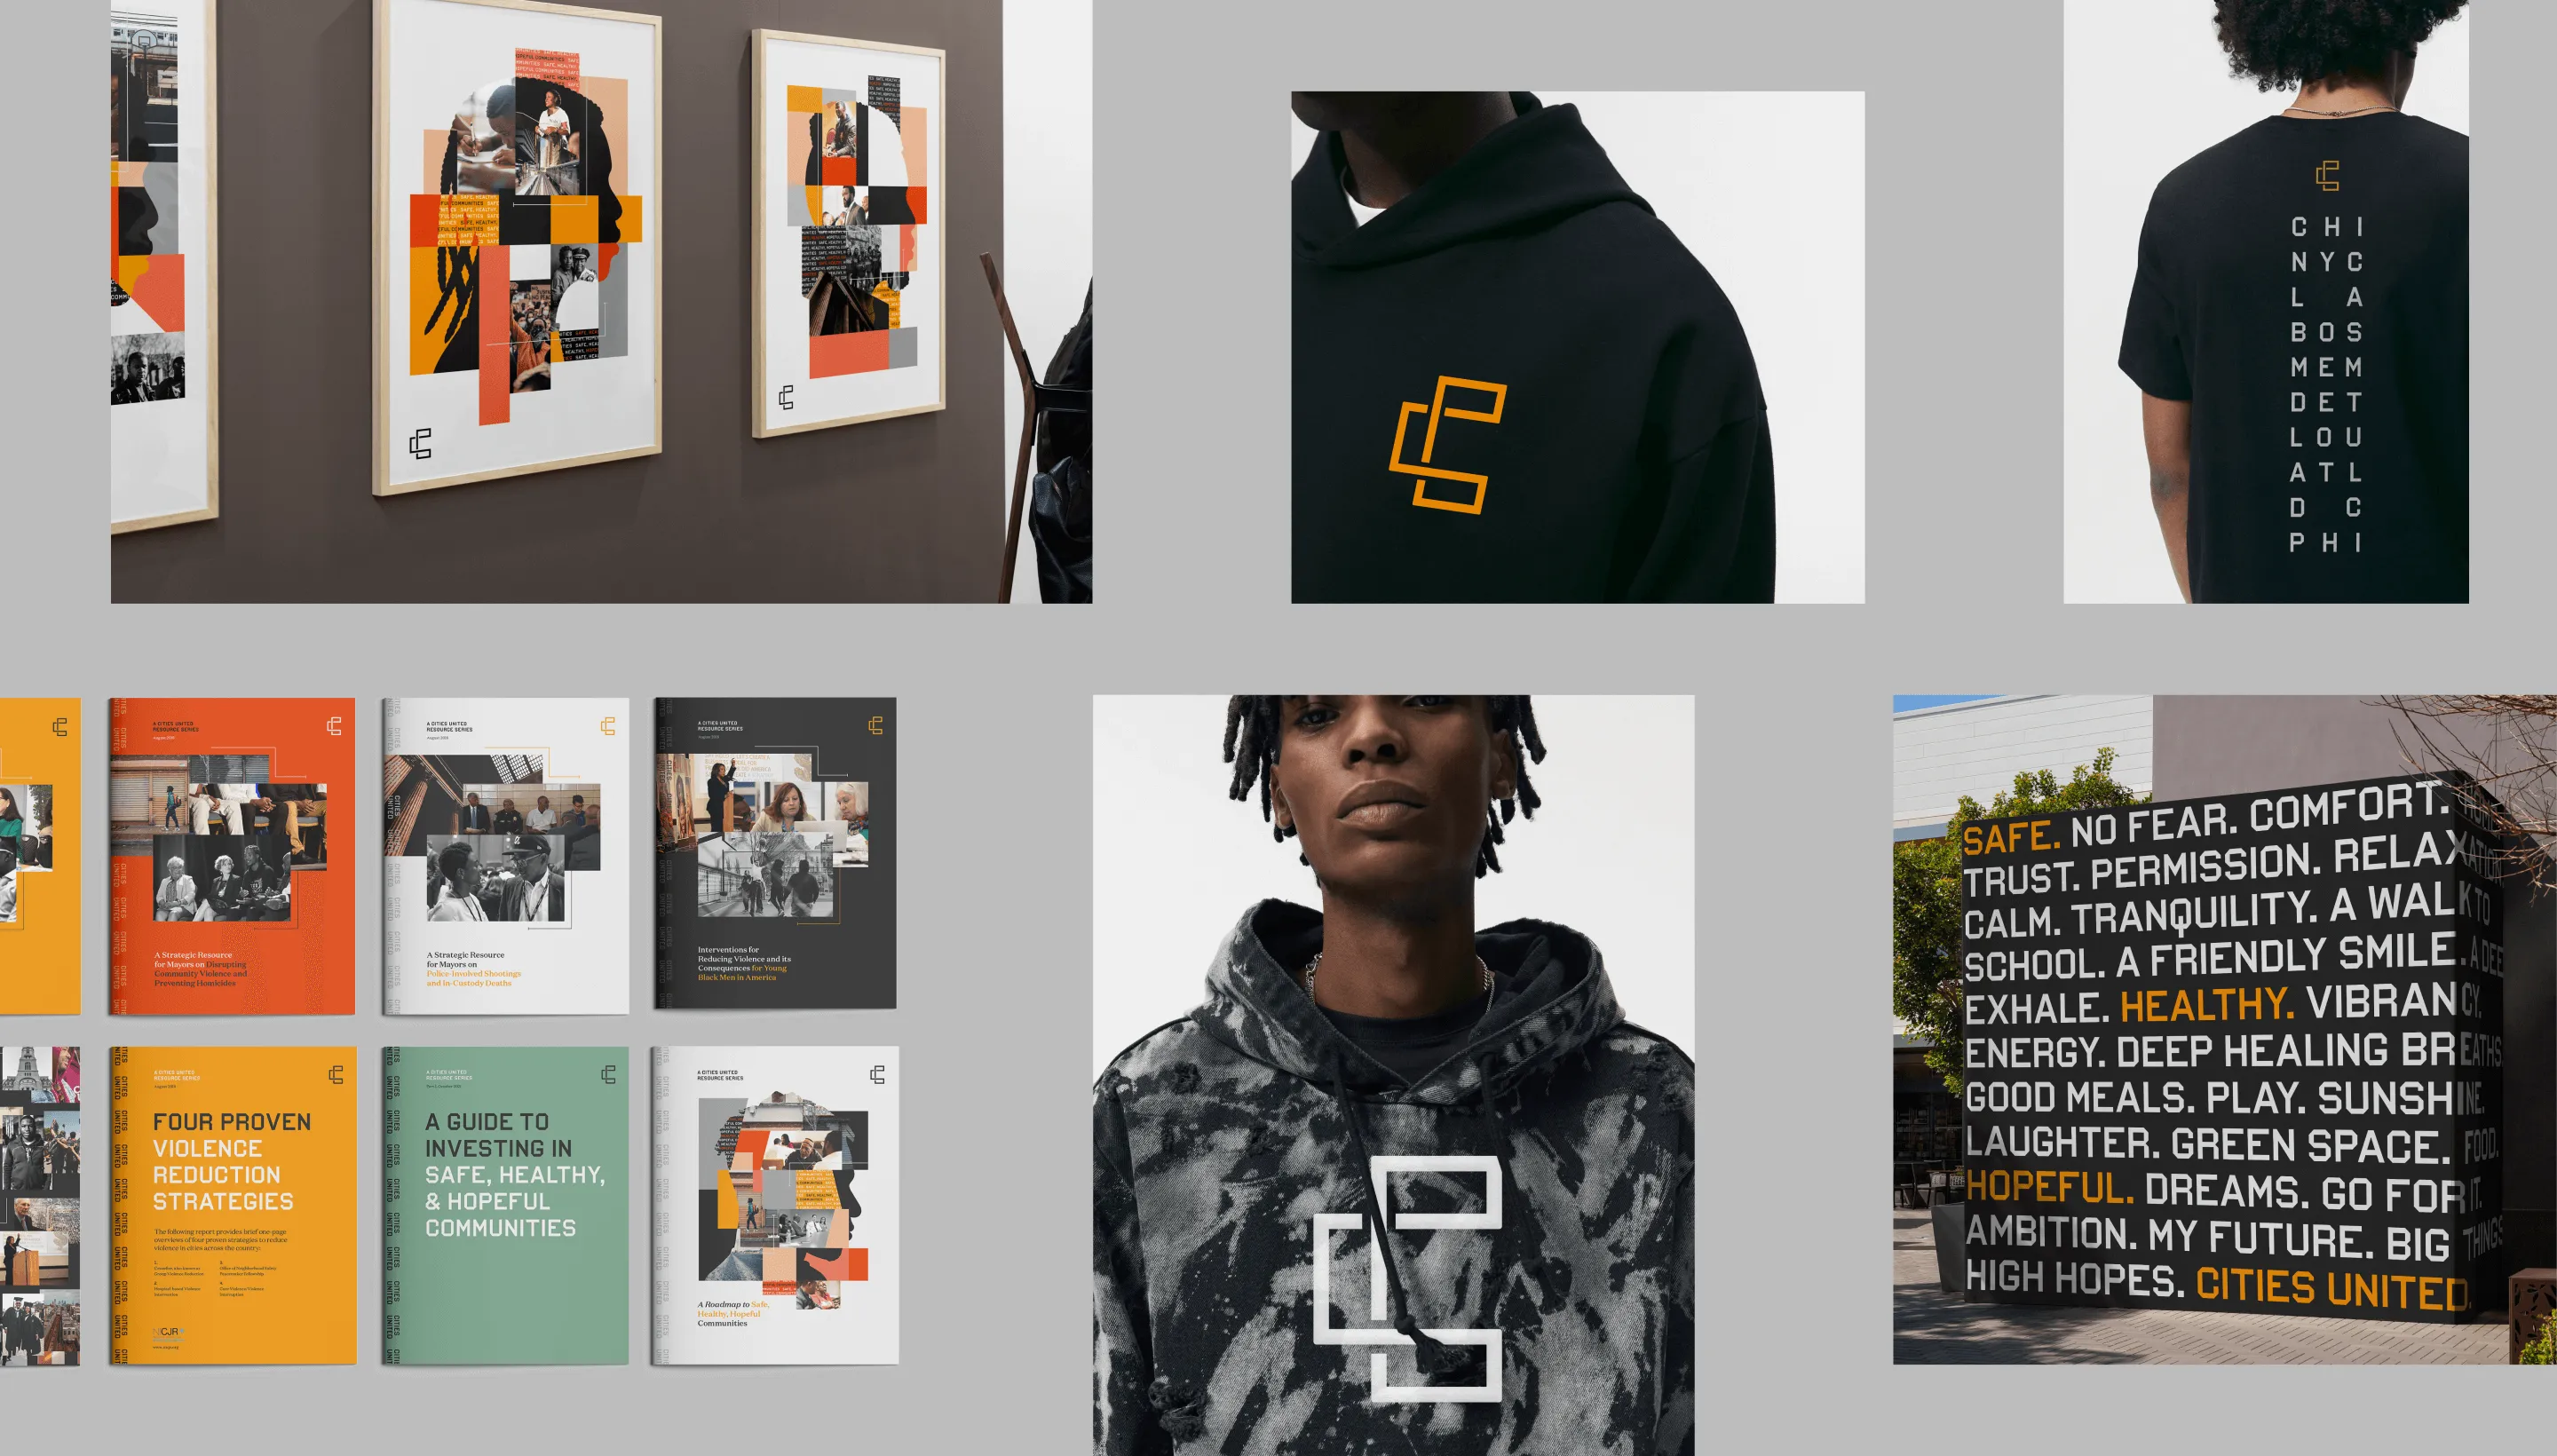 Some of the Cities United brand expressions, including illustrated portraits, shirts and hoodies, and murals.